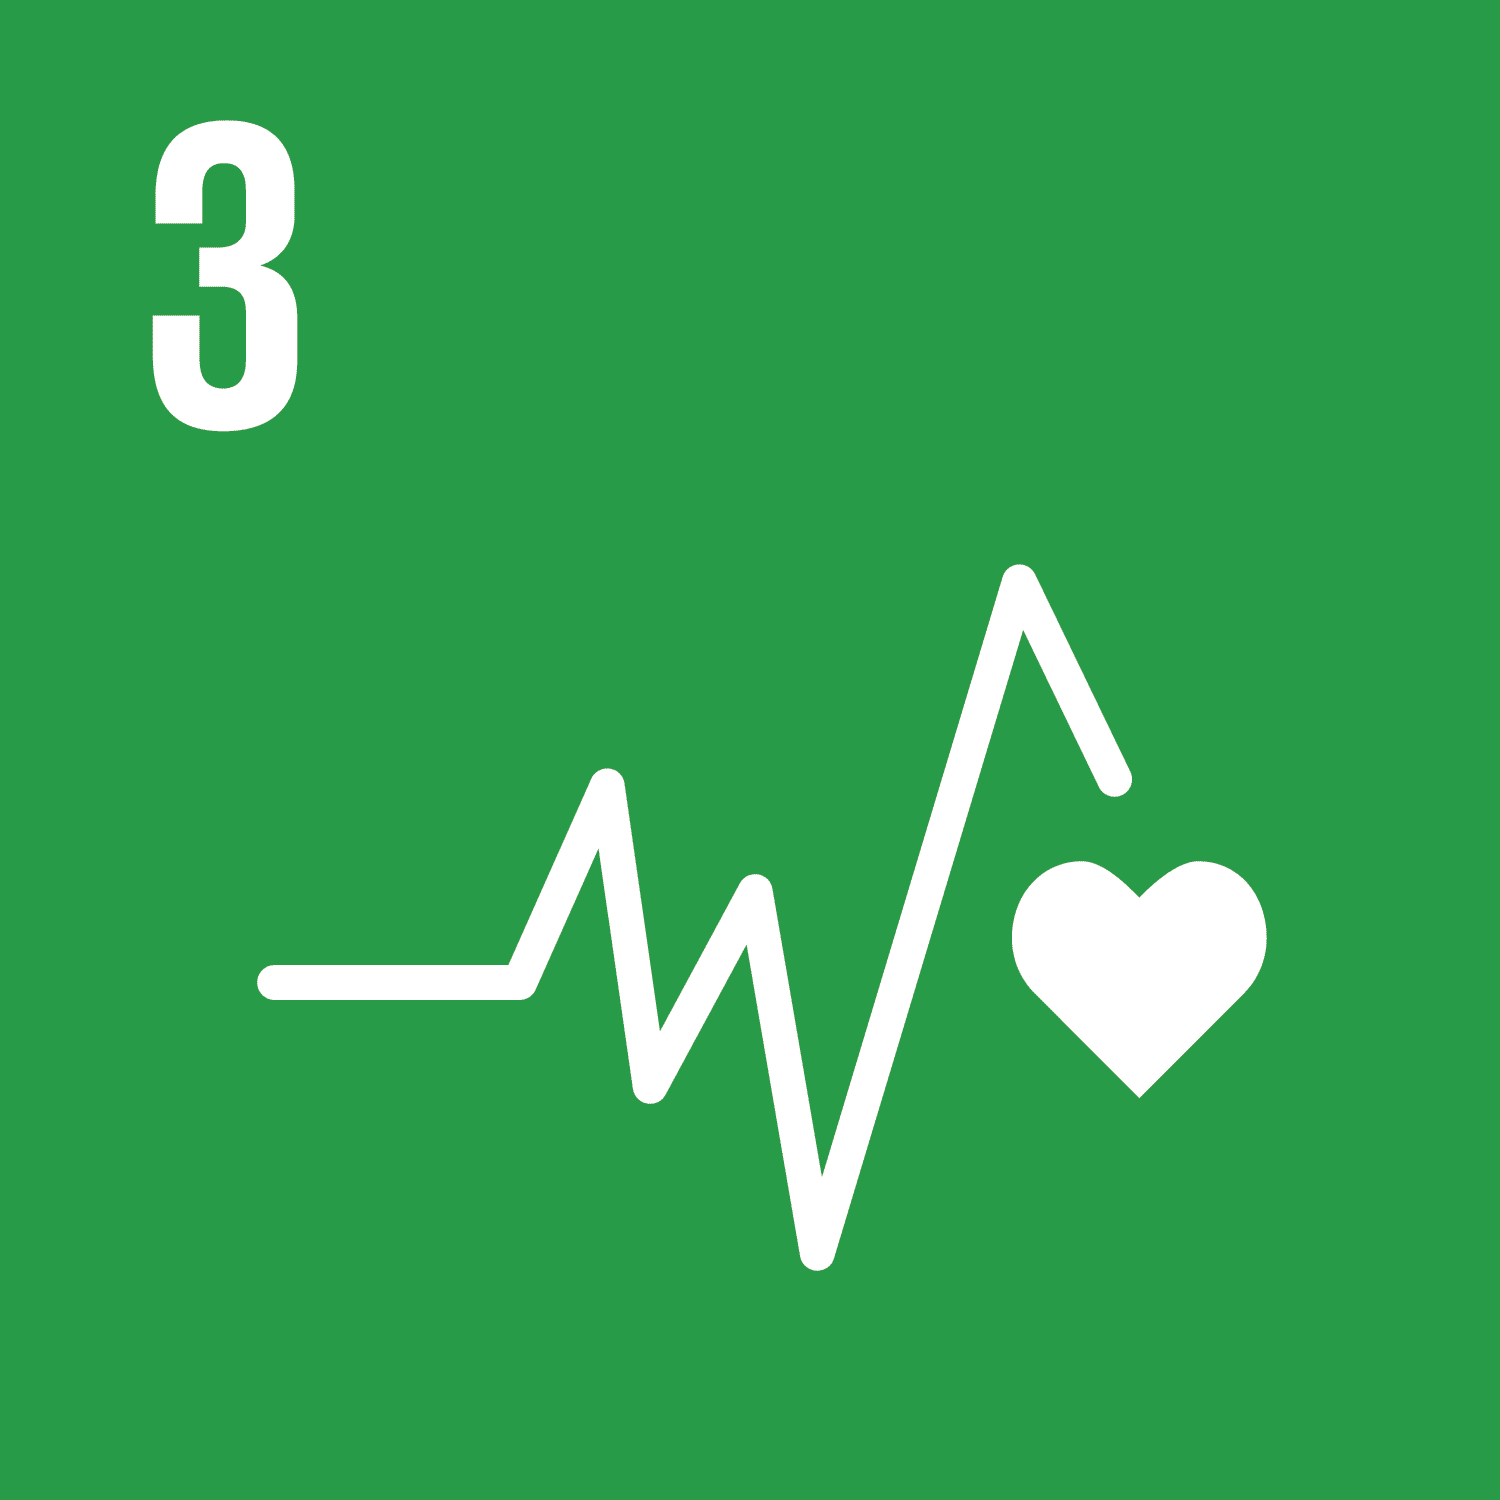 SDG 3. Good health and well-being.